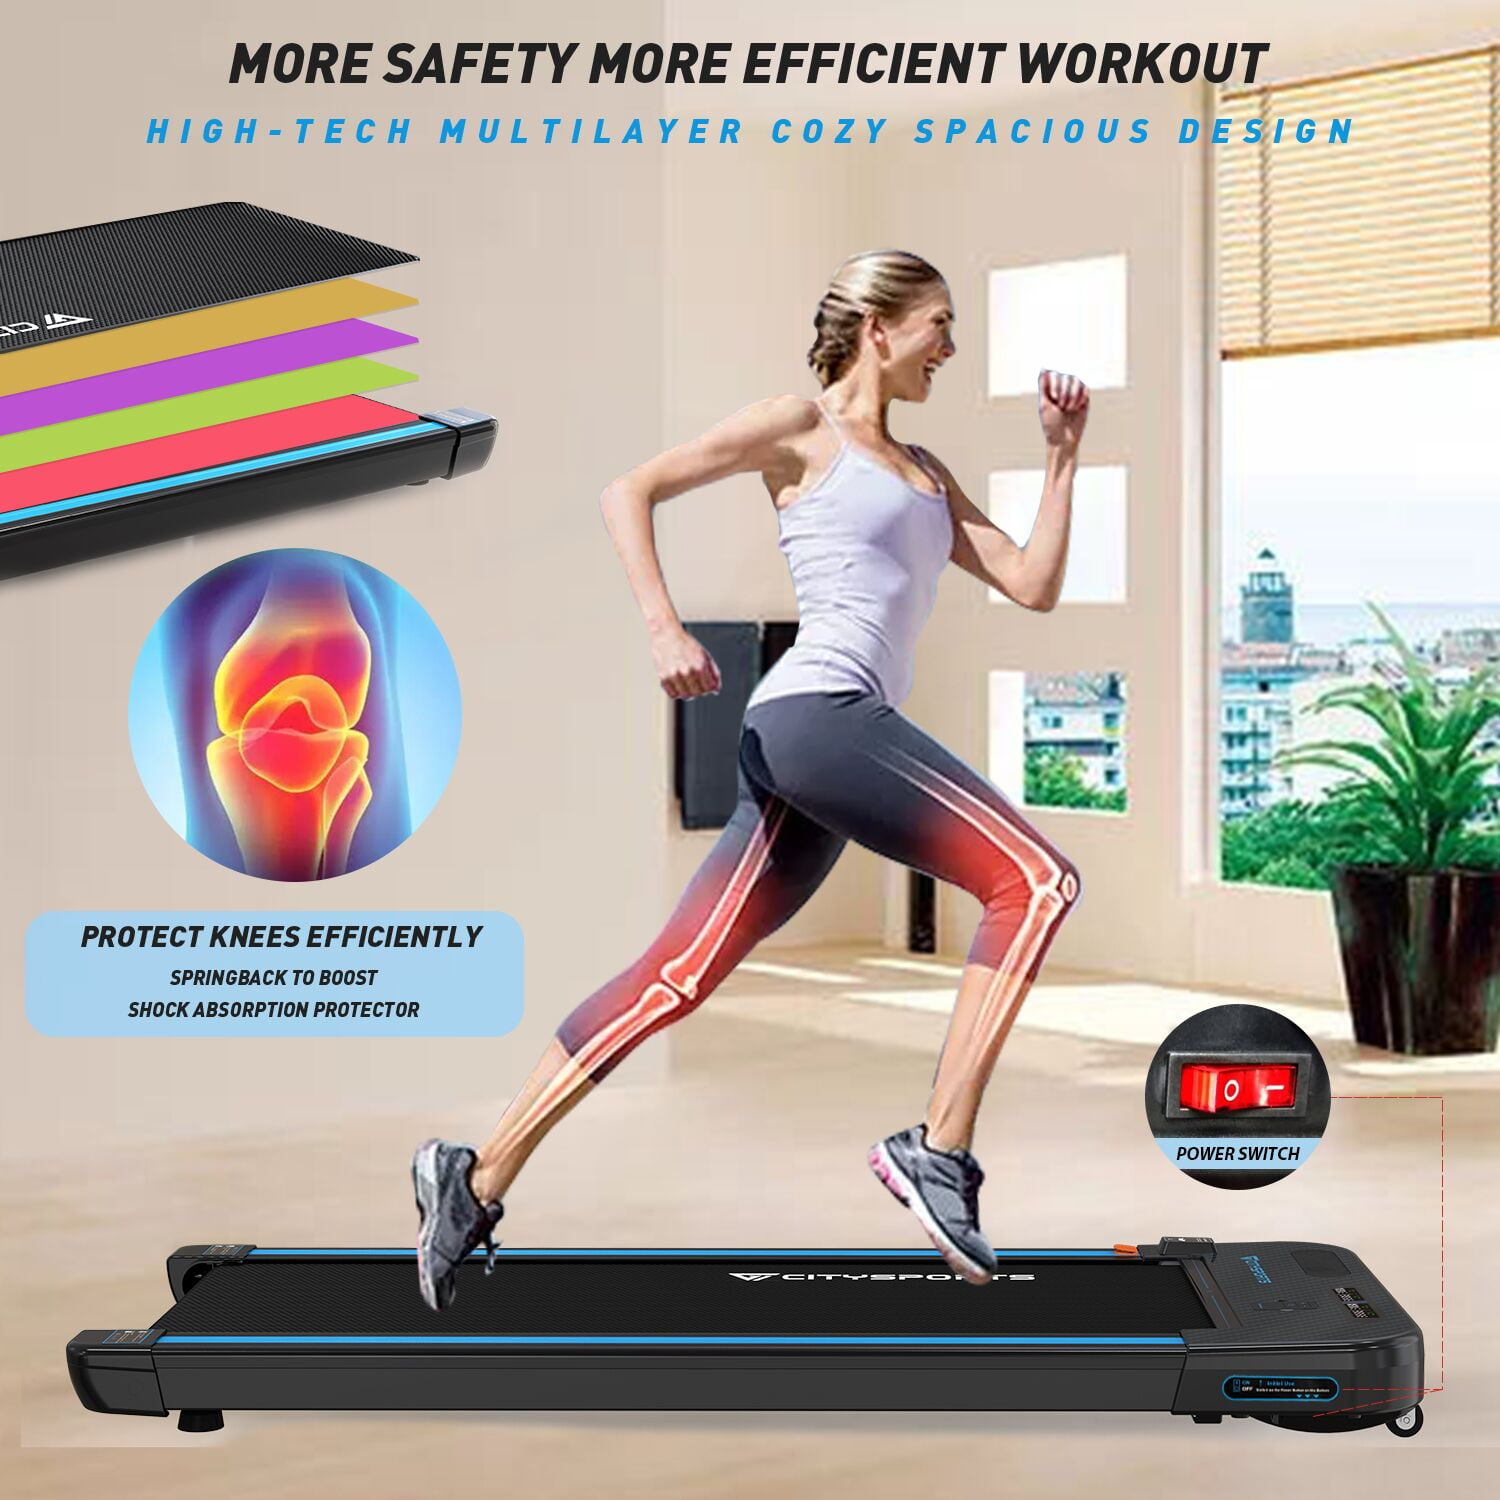 Quiet and Comfortable Gym CITYSPORTS Folding Treadmill Office/Home Fitness 1-6 km/h Electric Walking Machine Easy to Move and Store 